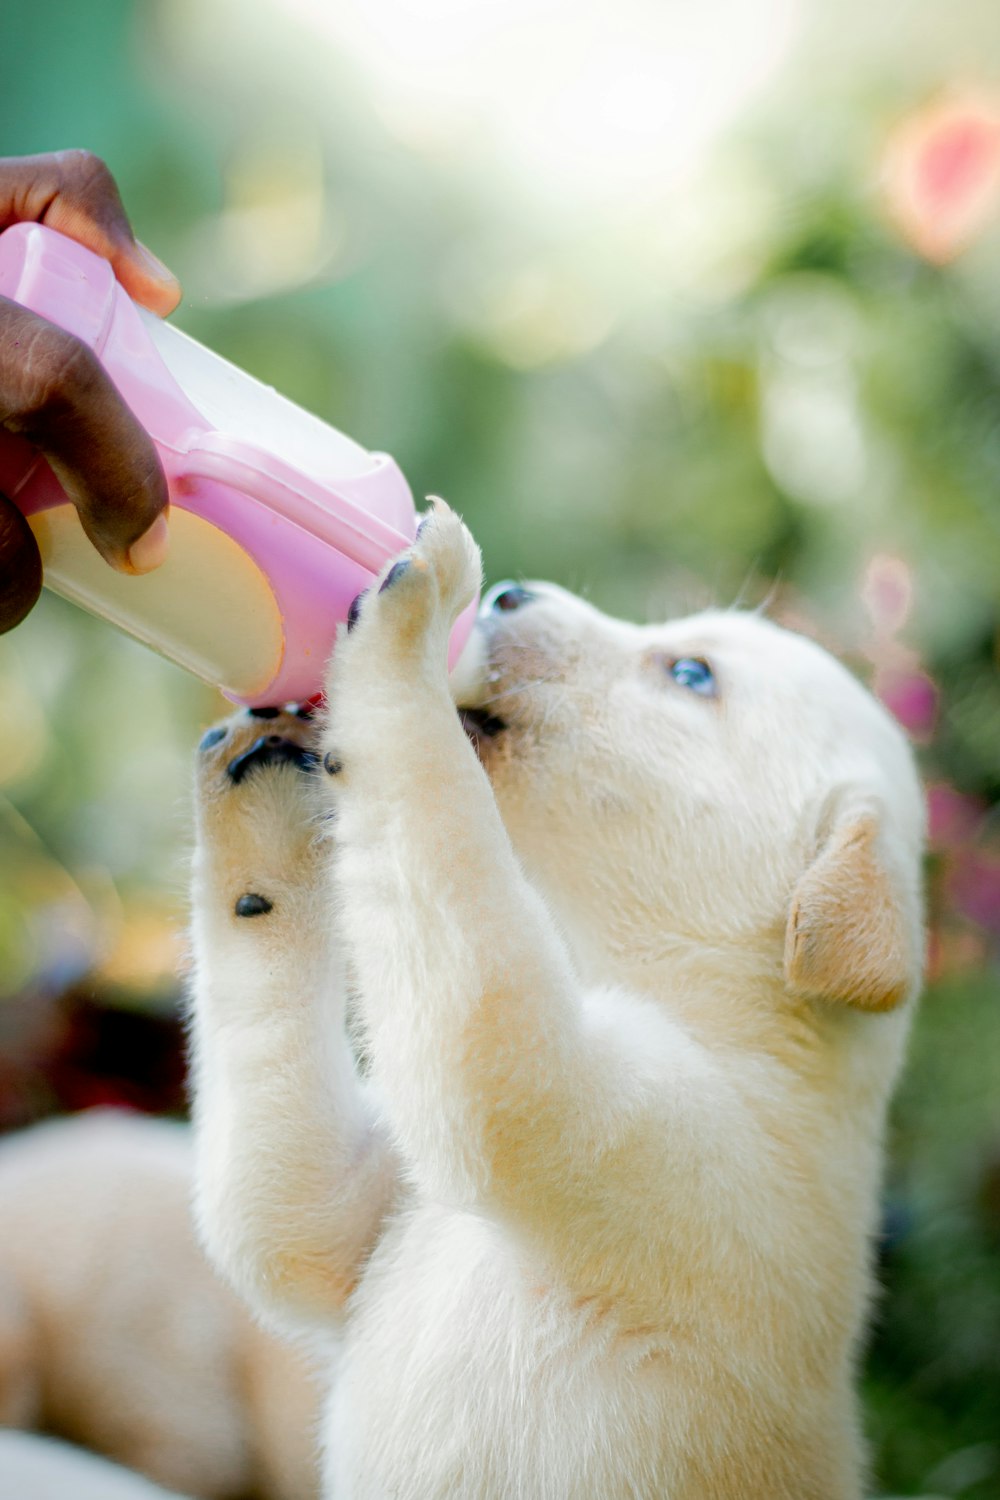 a baby polar bear drinking from a bottle